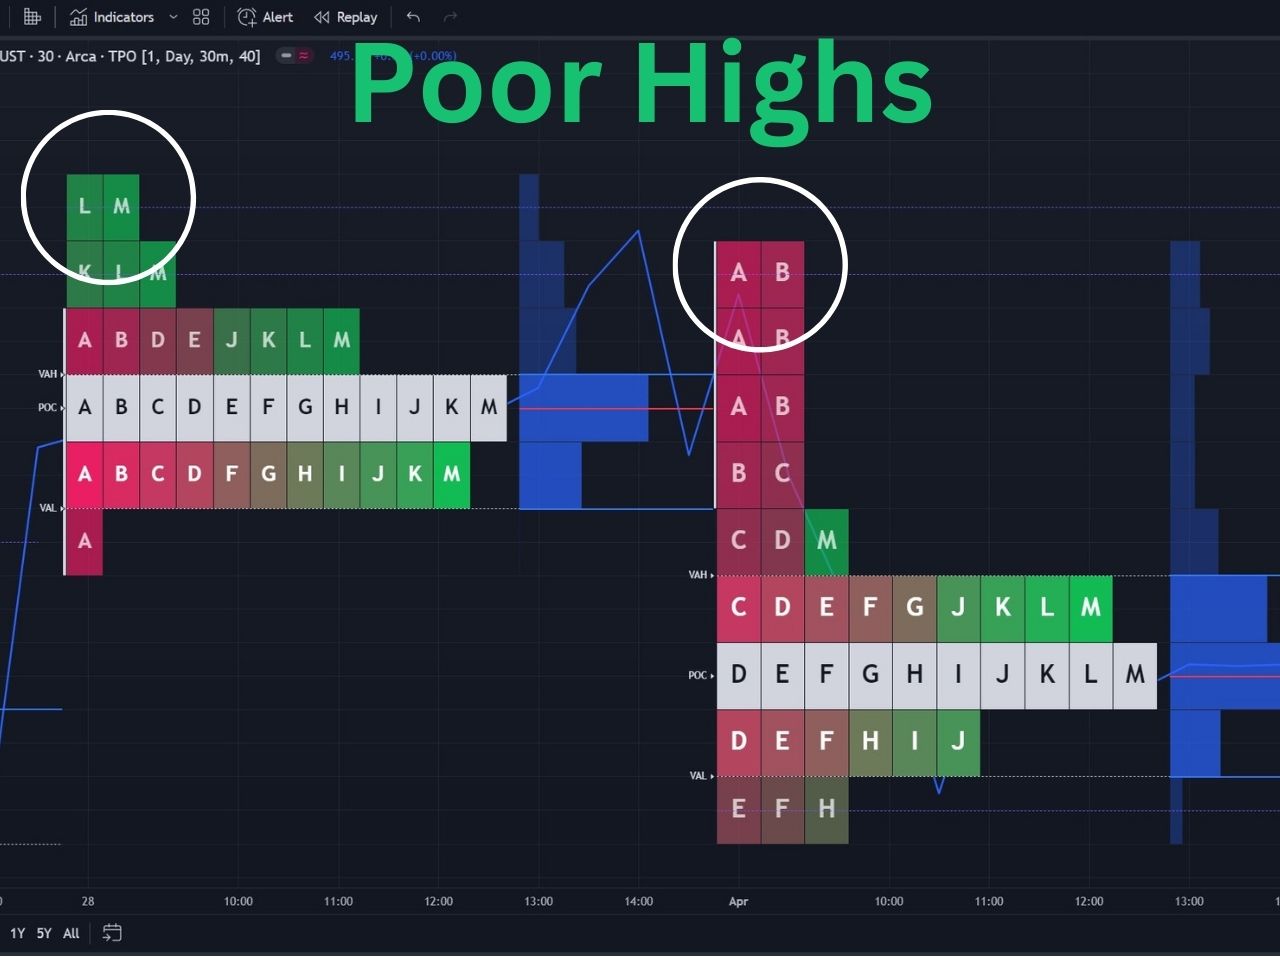 poor high example on tradingview